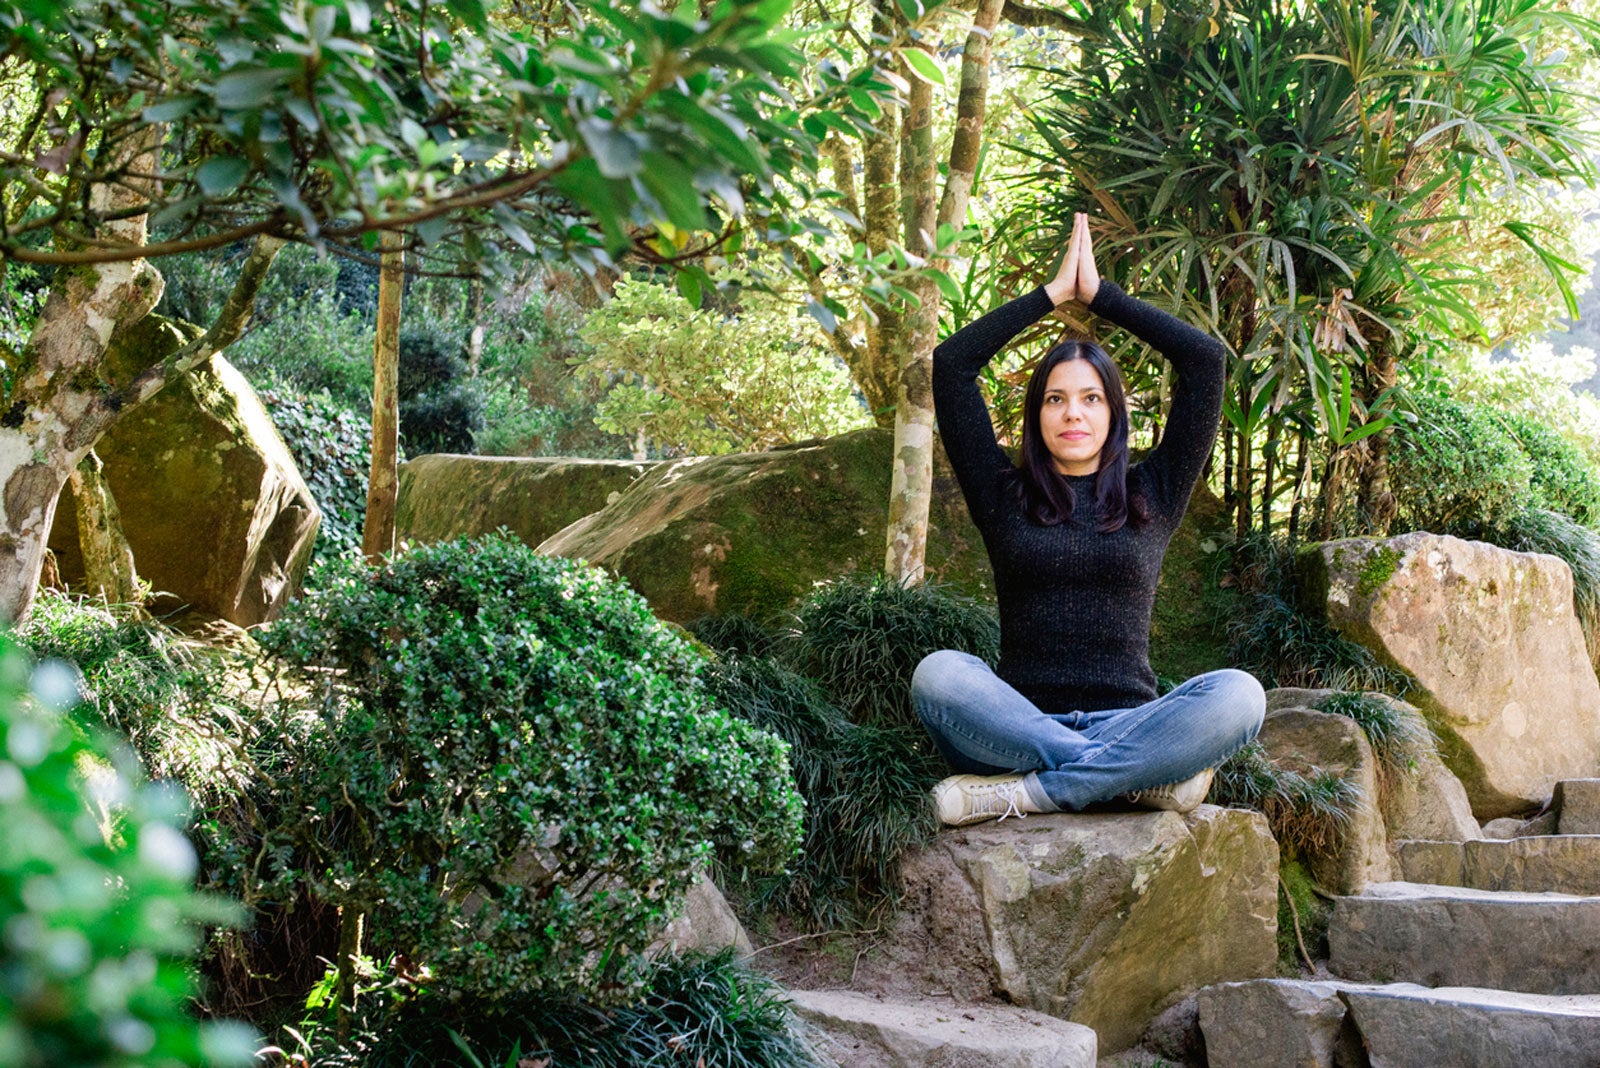 Garden Yoga Ideas: Learn About Benefits Of Yoga In The Garden